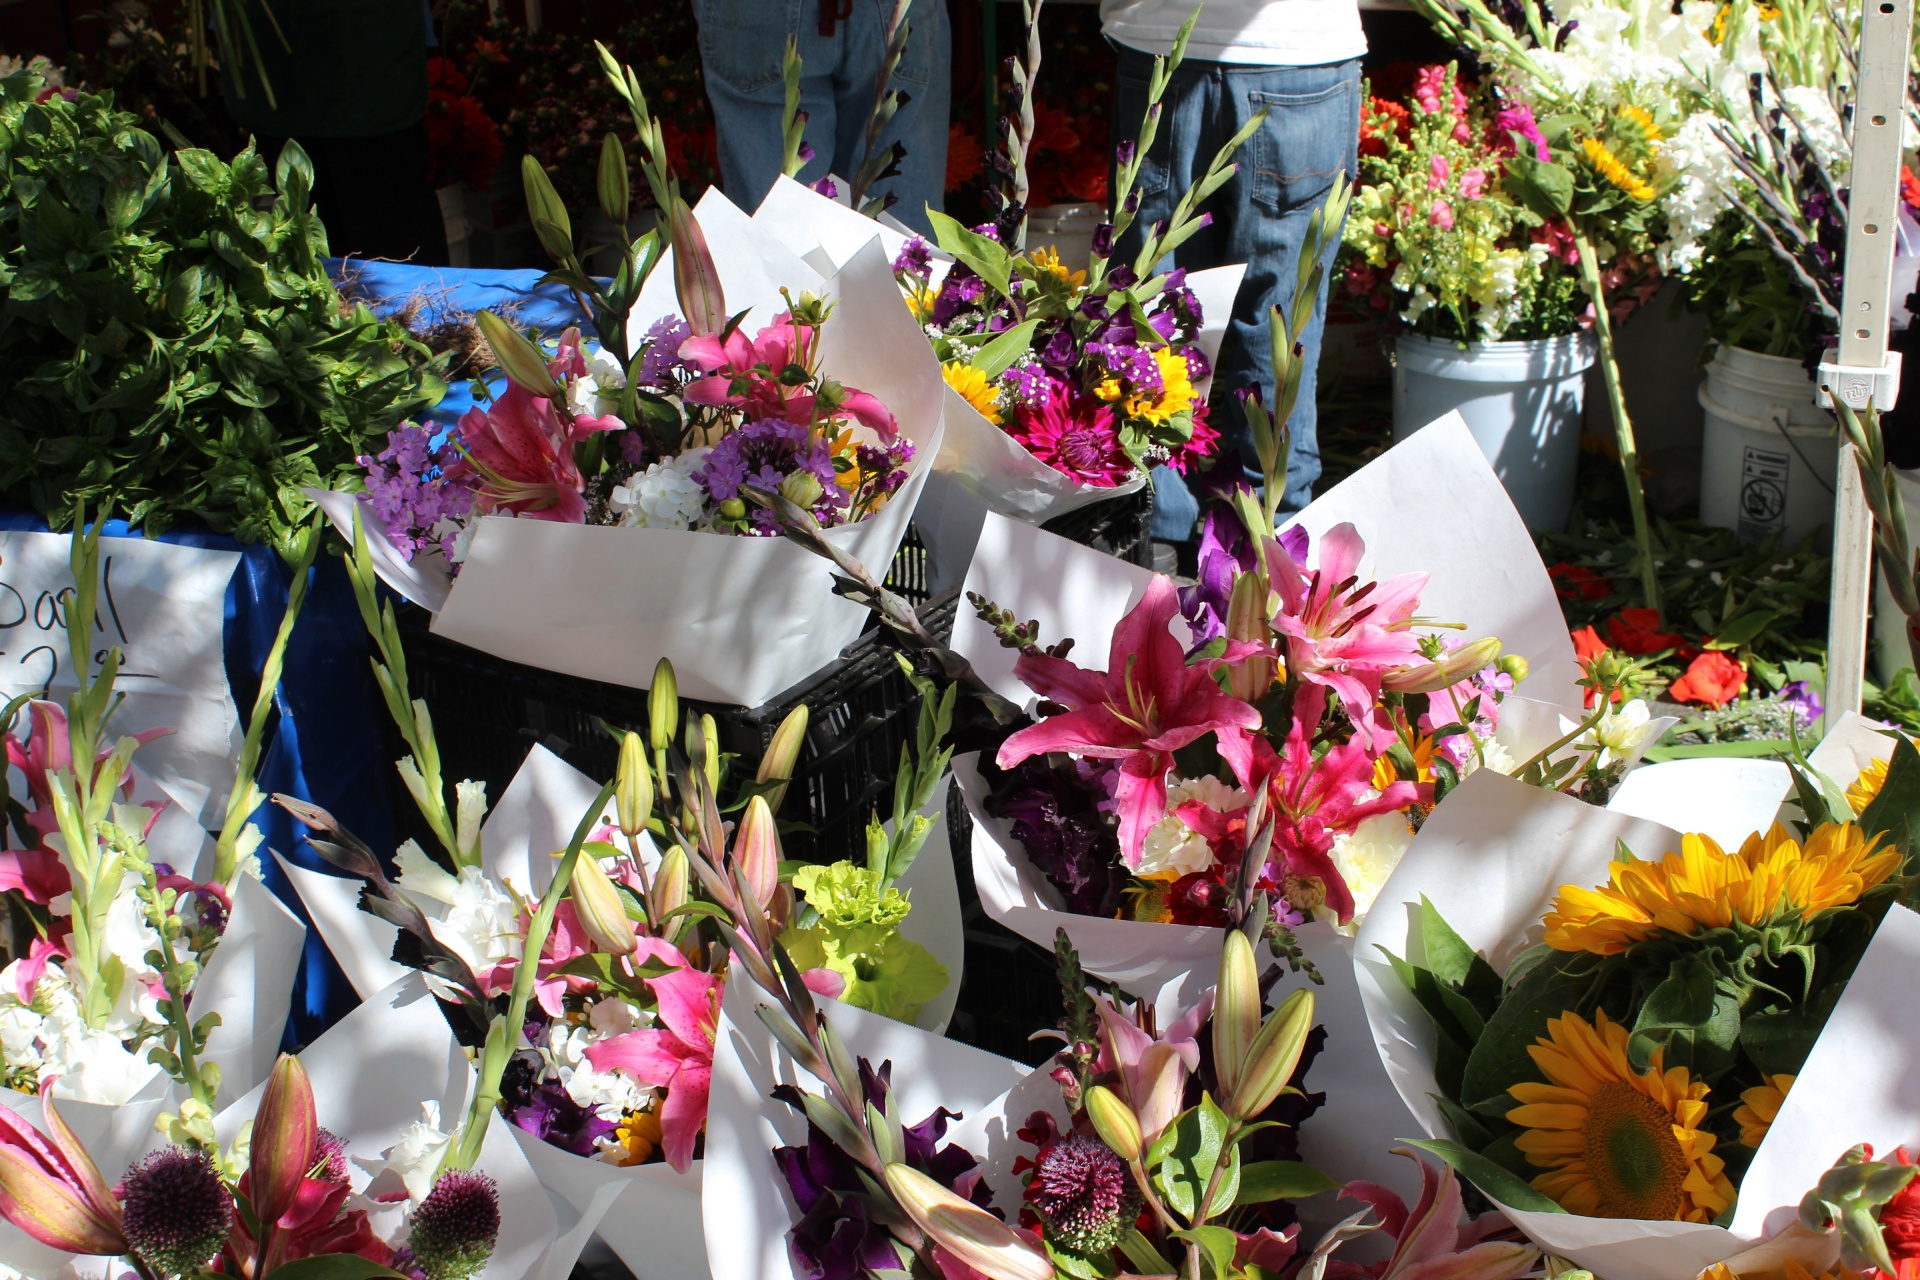 Farmers' Market vendor stand with an assortment of fresh flowers for sale